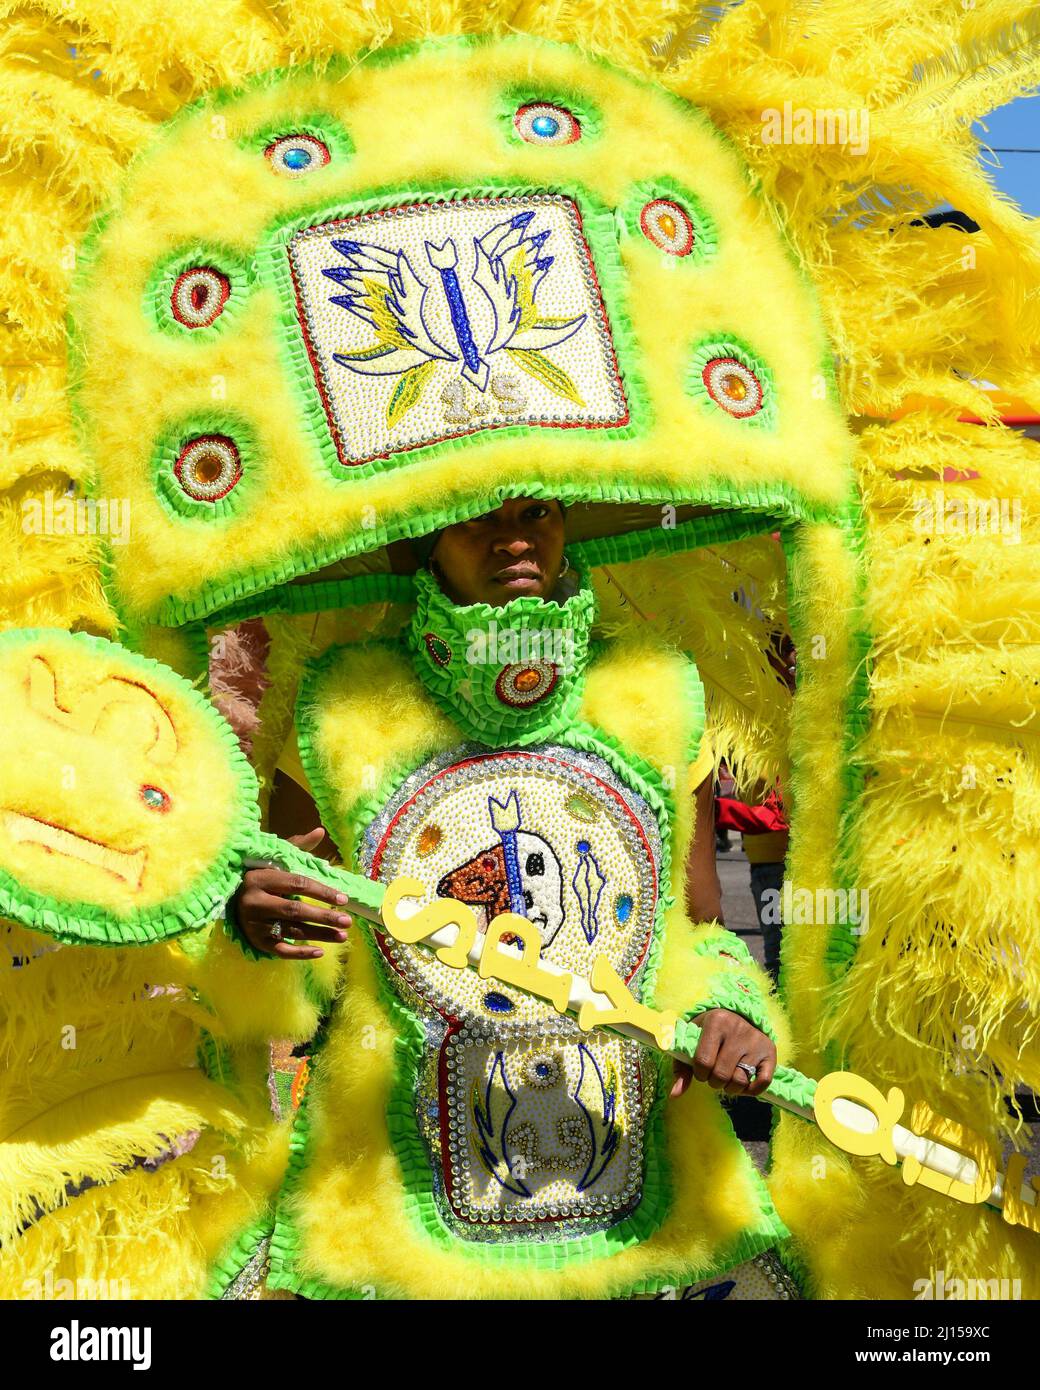 Mardi Gras Indian Krewe Parade am Super Sunday in New Orleans Stockfoto